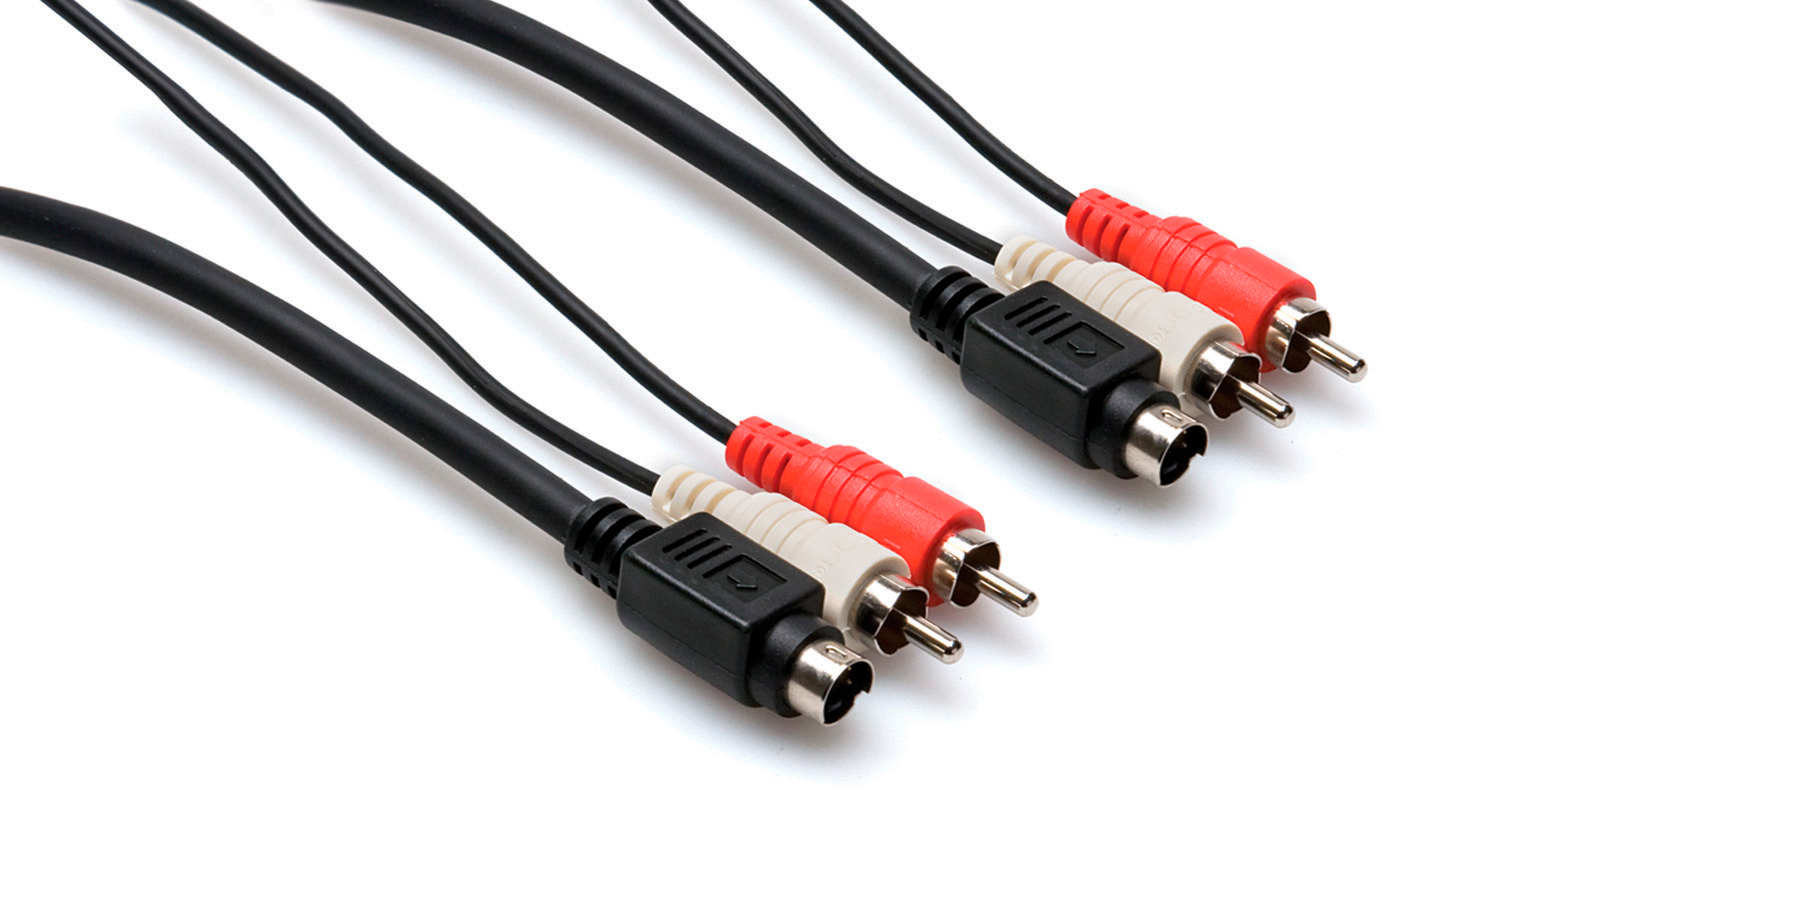 S-Video AV Cable - Video Cables & Adapters Hosa Cables.